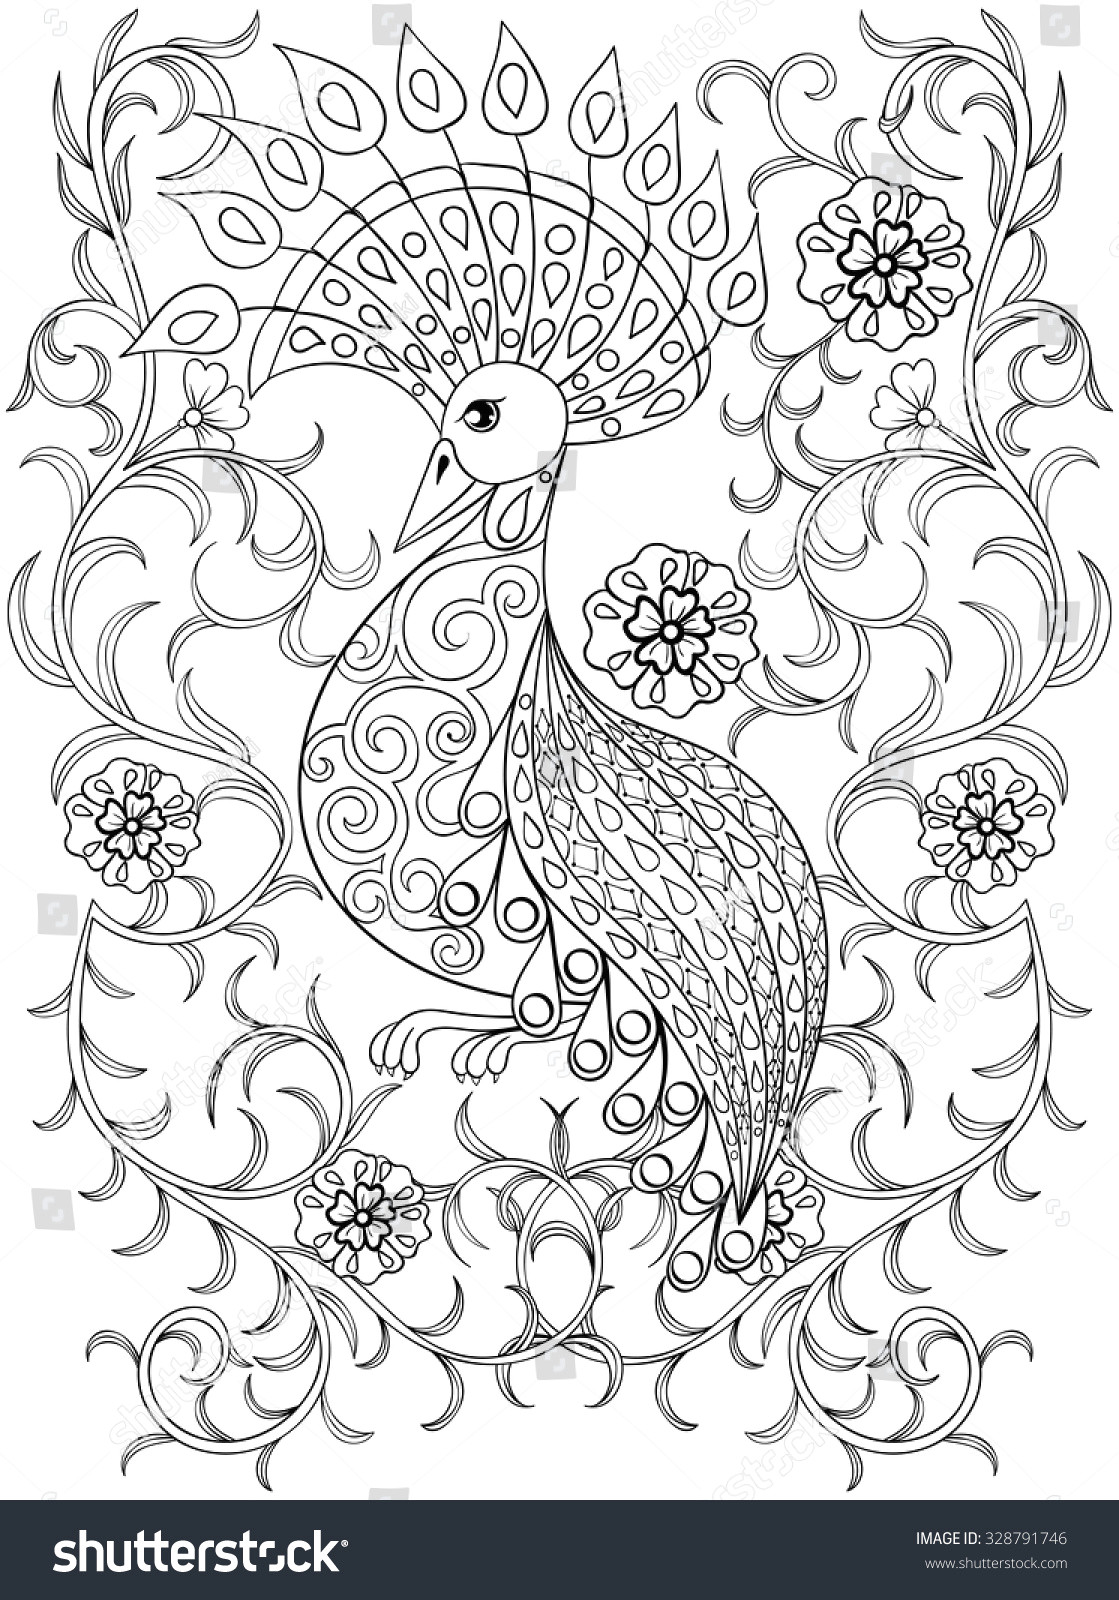 Drawing Of Flowers with Birds Royalty Free Coloring Page with Bird In Flowers 328791746 Stock